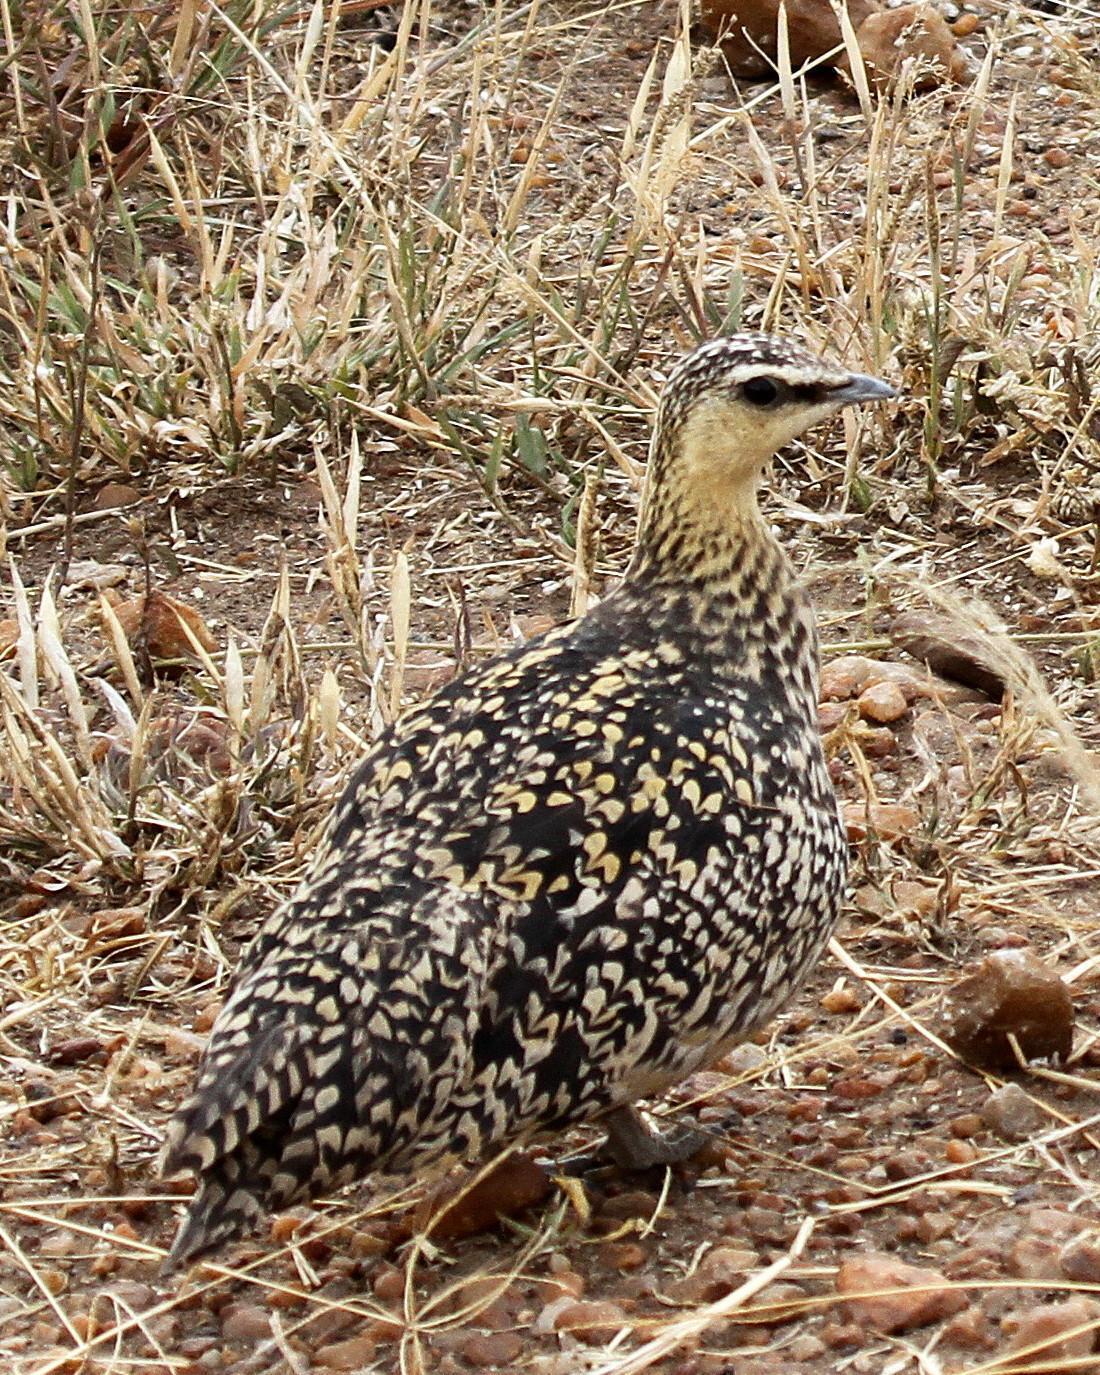 Yellow-throated Sandgrouse Photo by David Lang